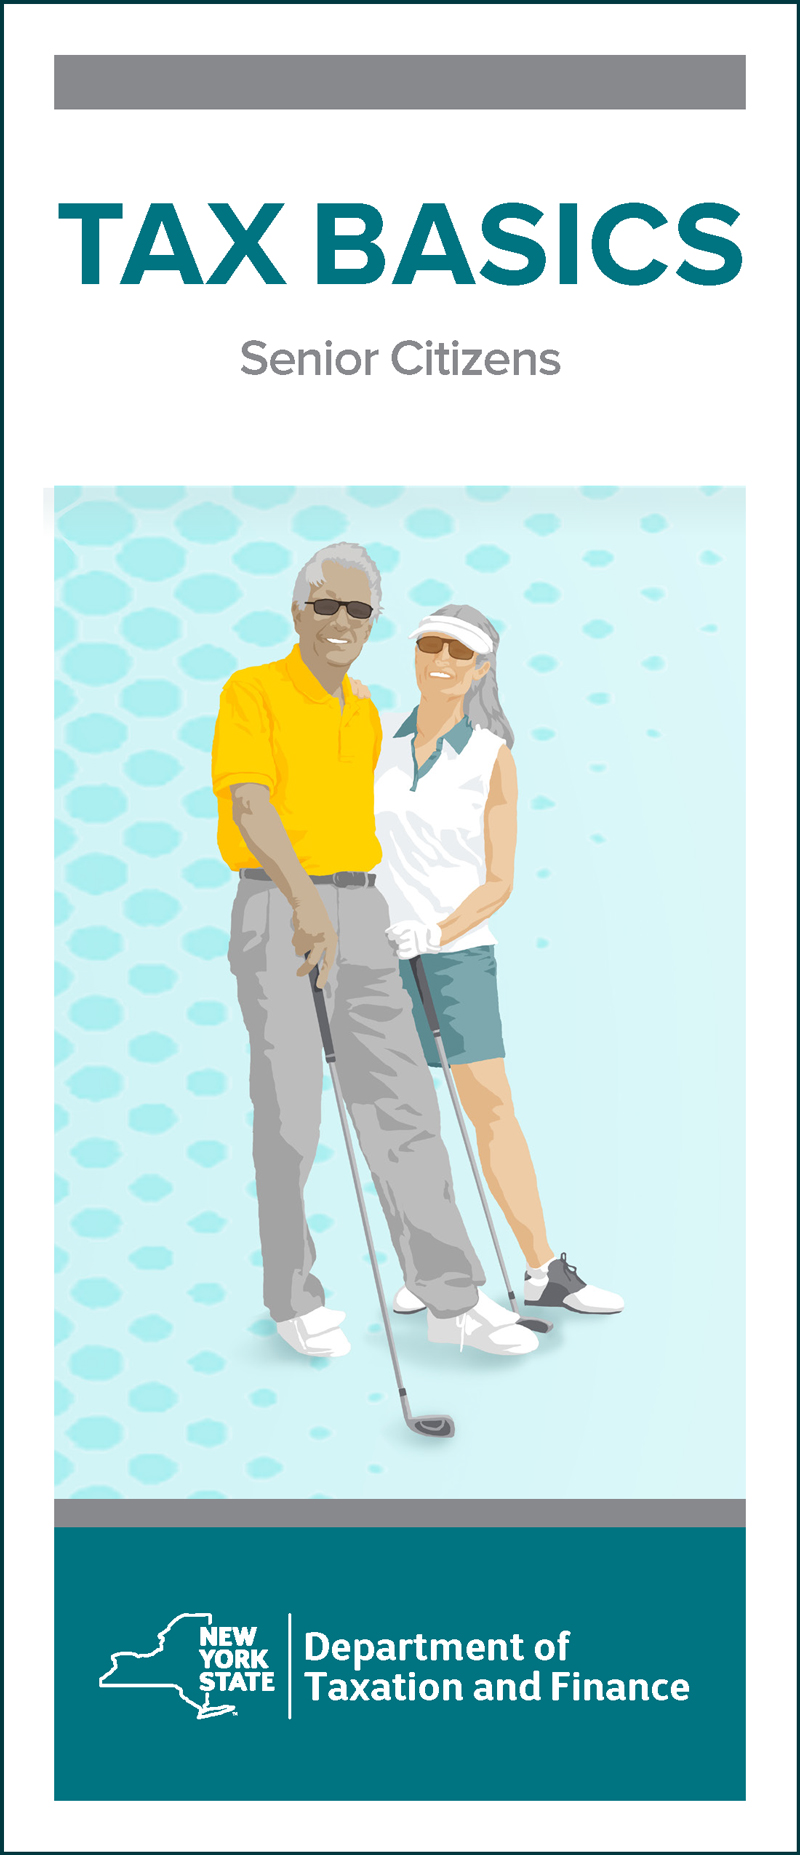 Two senior citizens playing golf